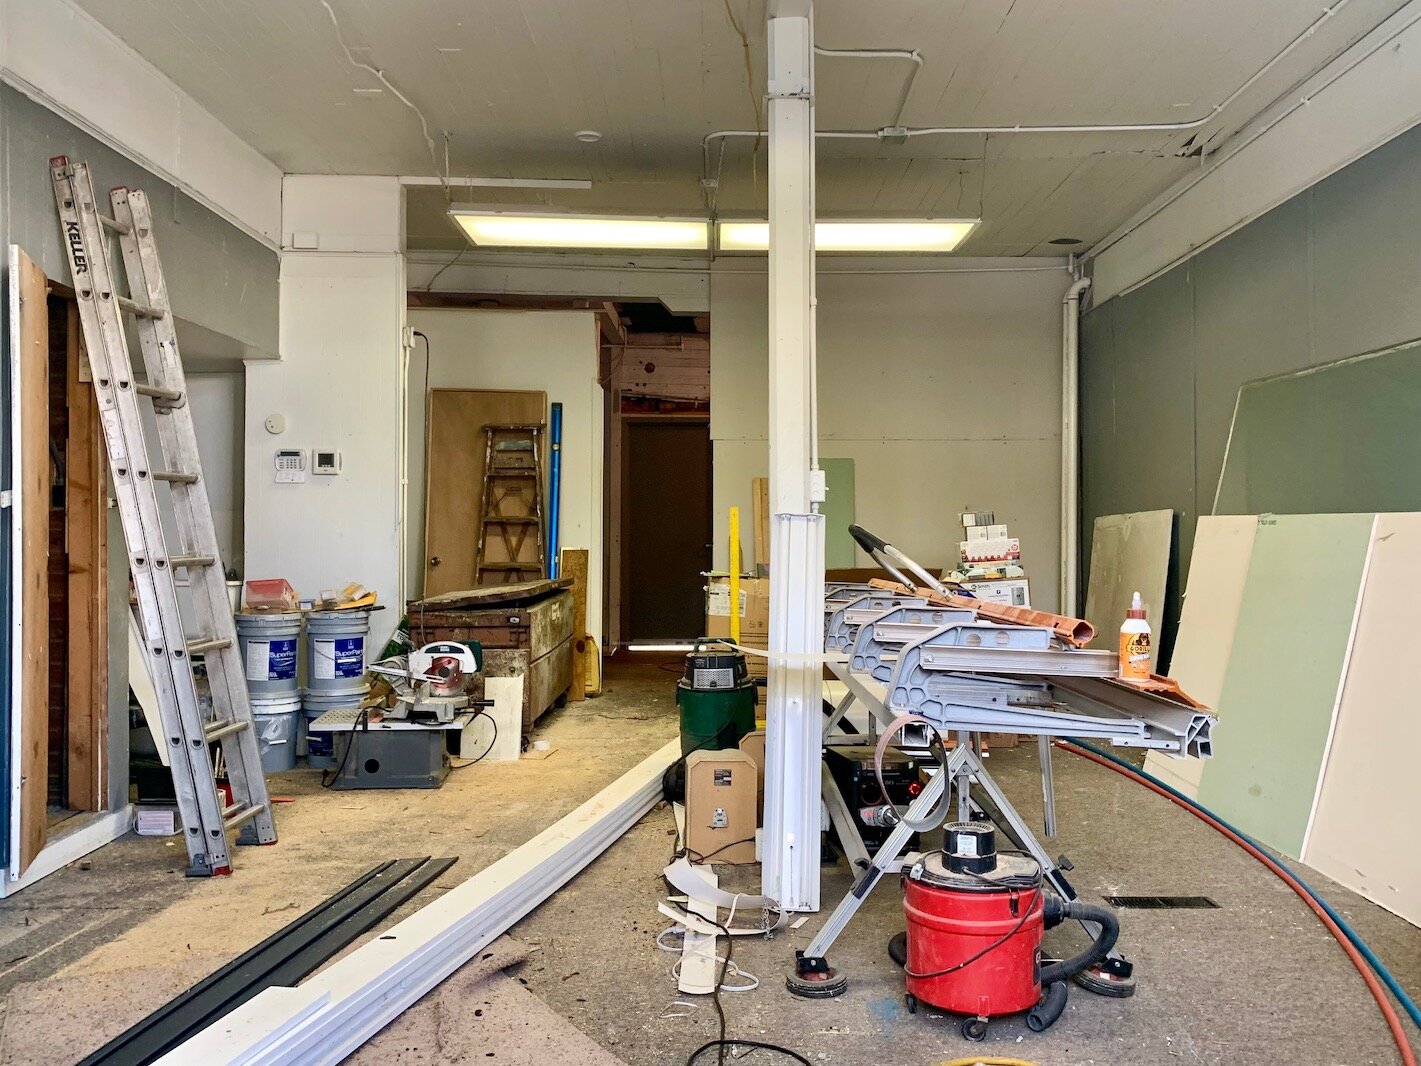  Additional commercial space on the ground level of the 100+ year-old former Bob’s Barber Shop building is being renovated for a yet-undecided business use.